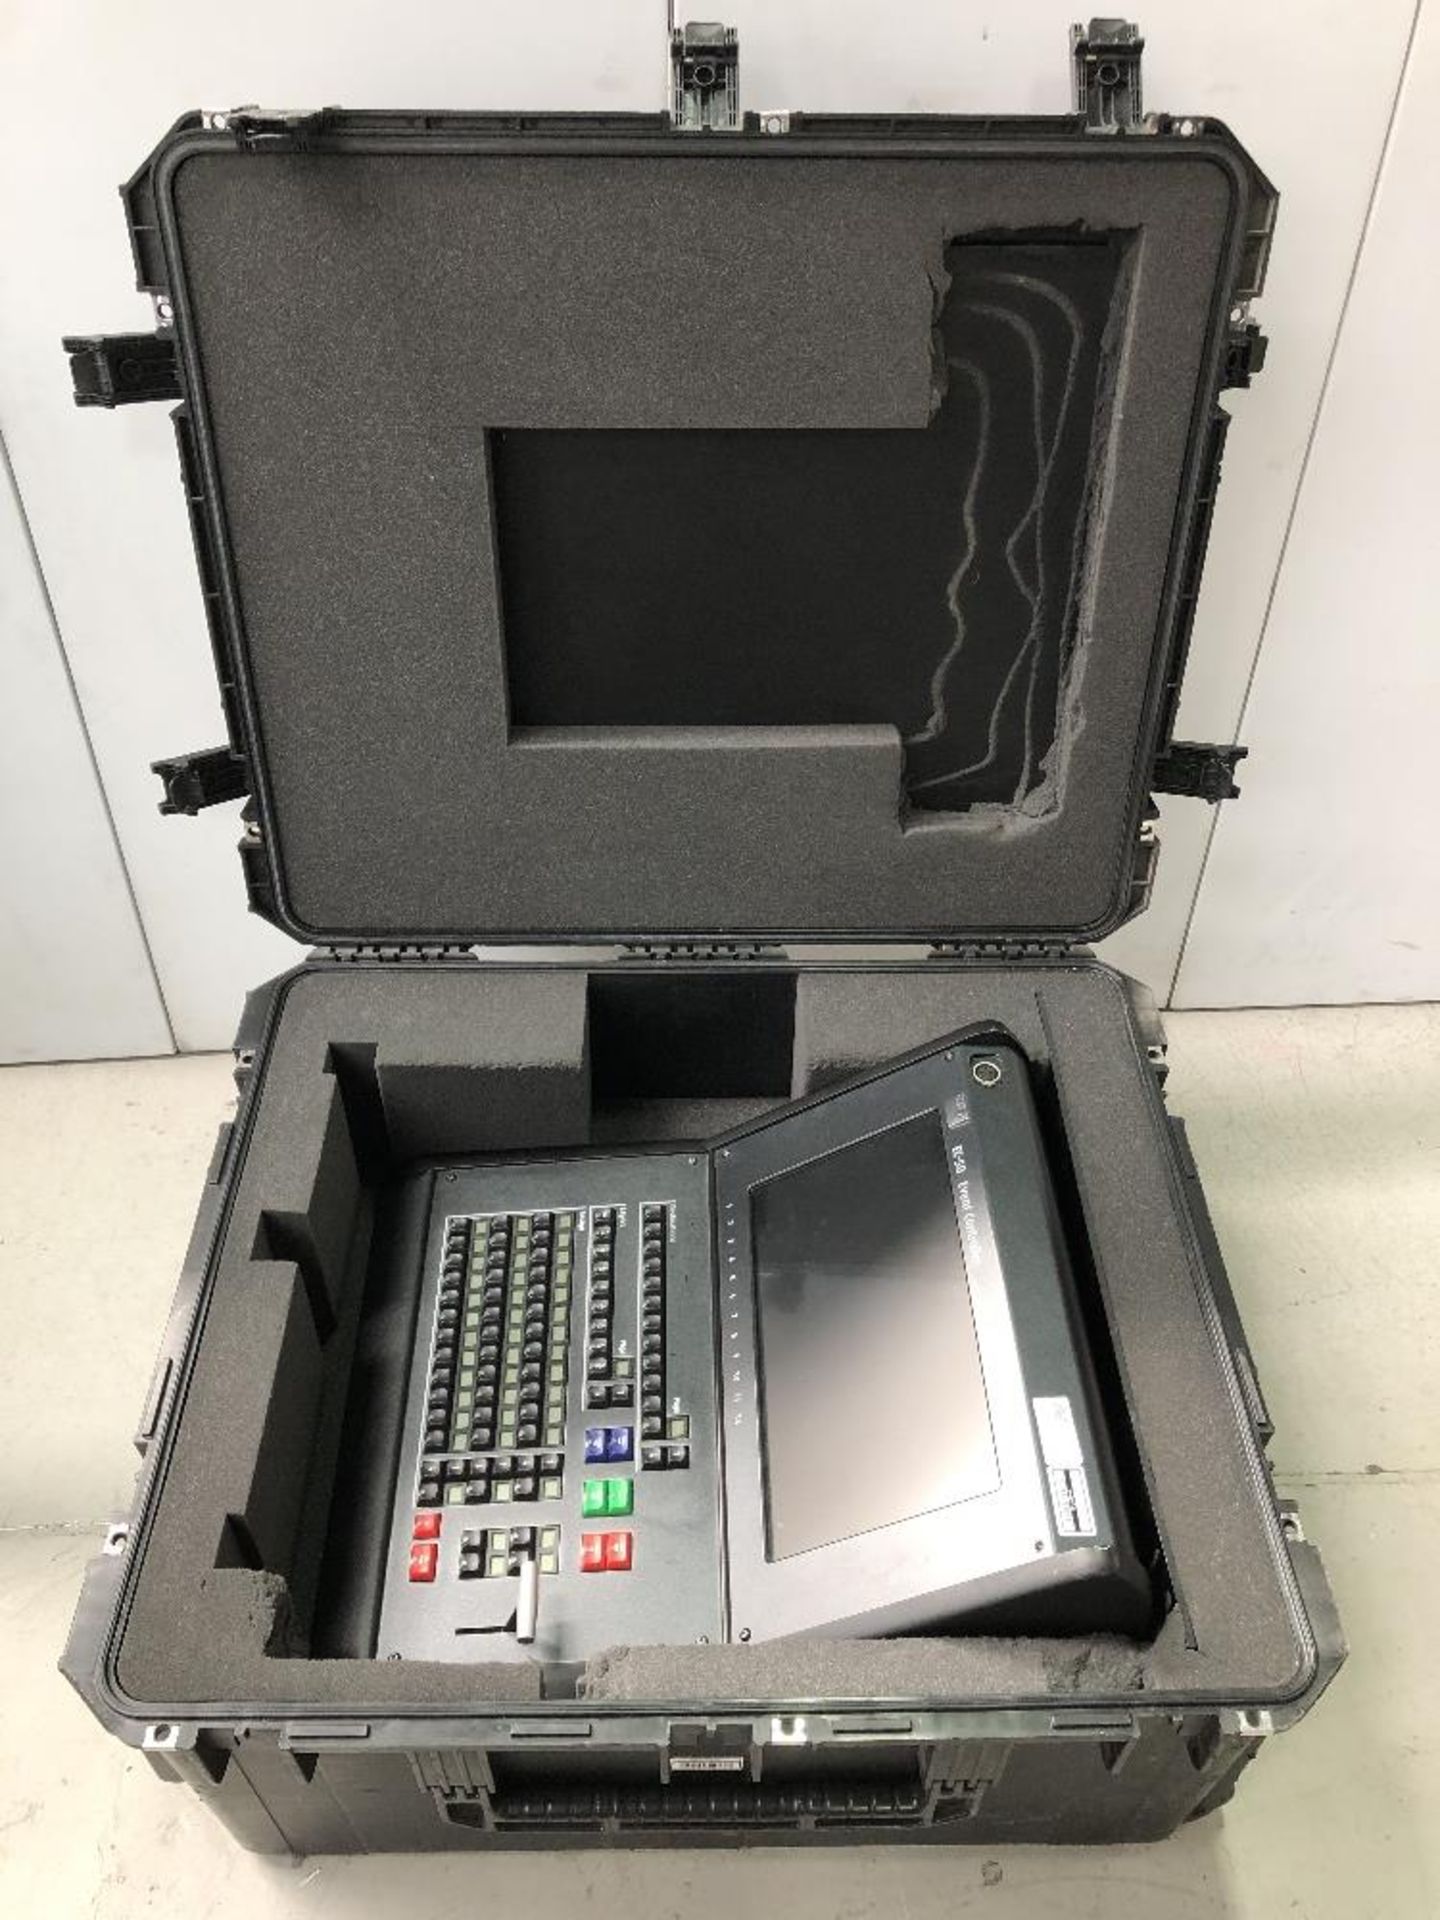 Barco EM EC50 Controller with Protective Case and Bag - Image 4 of 5